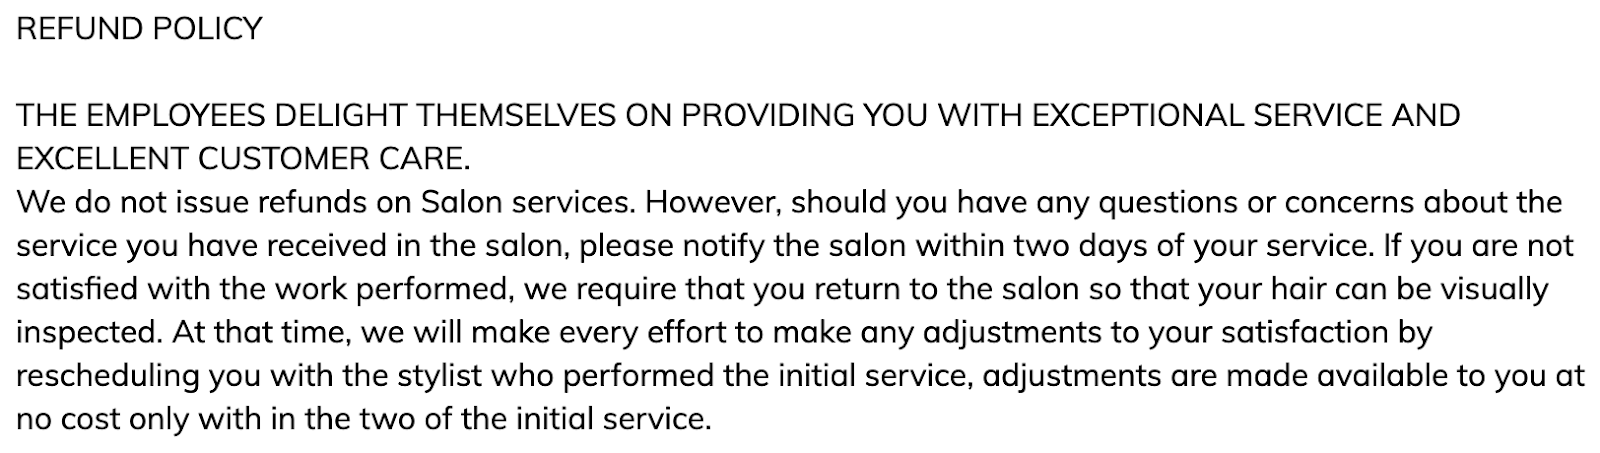 no refund policy example with additional services